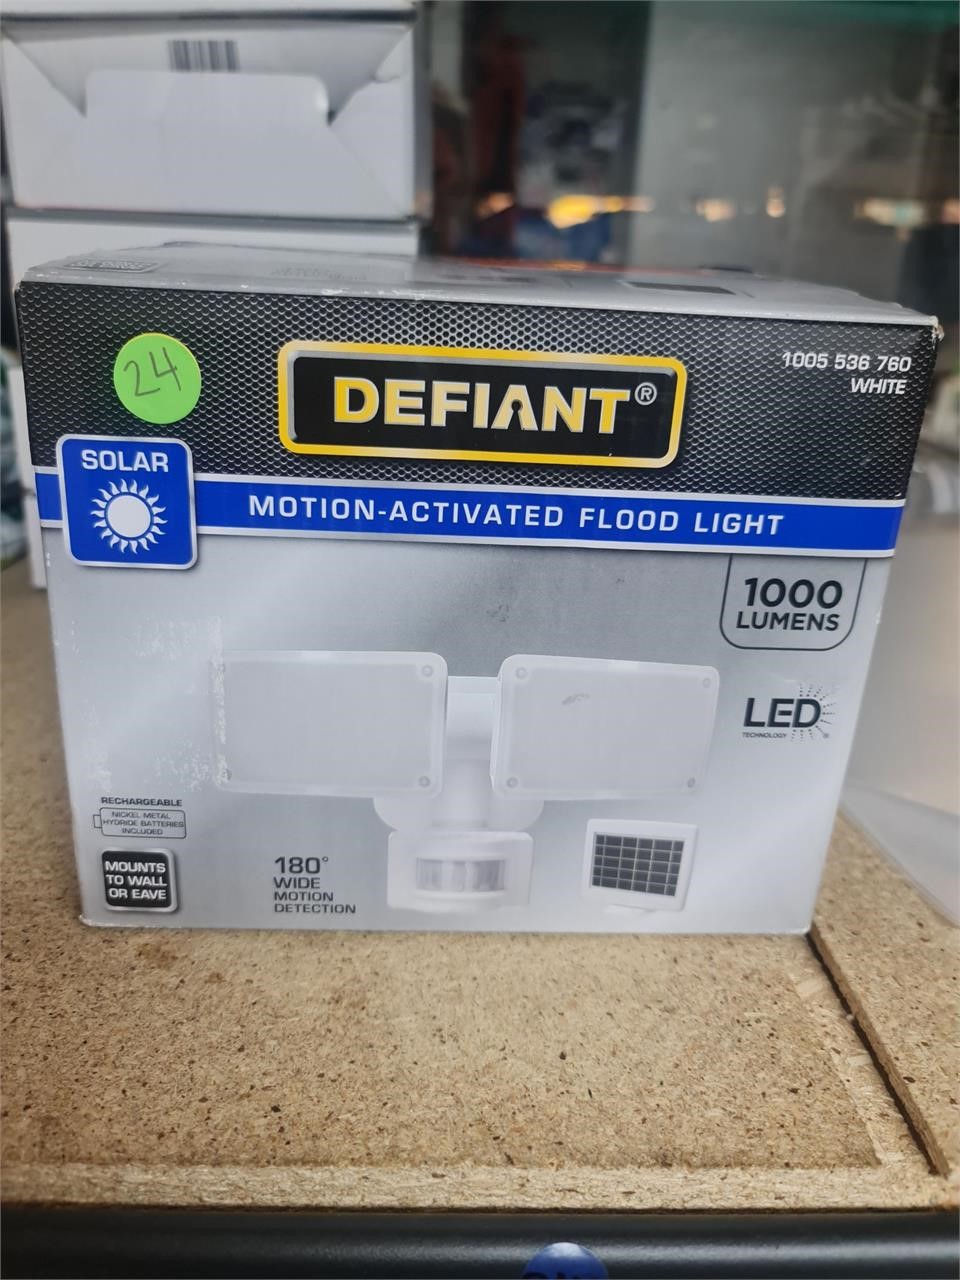 Motion activated flood light